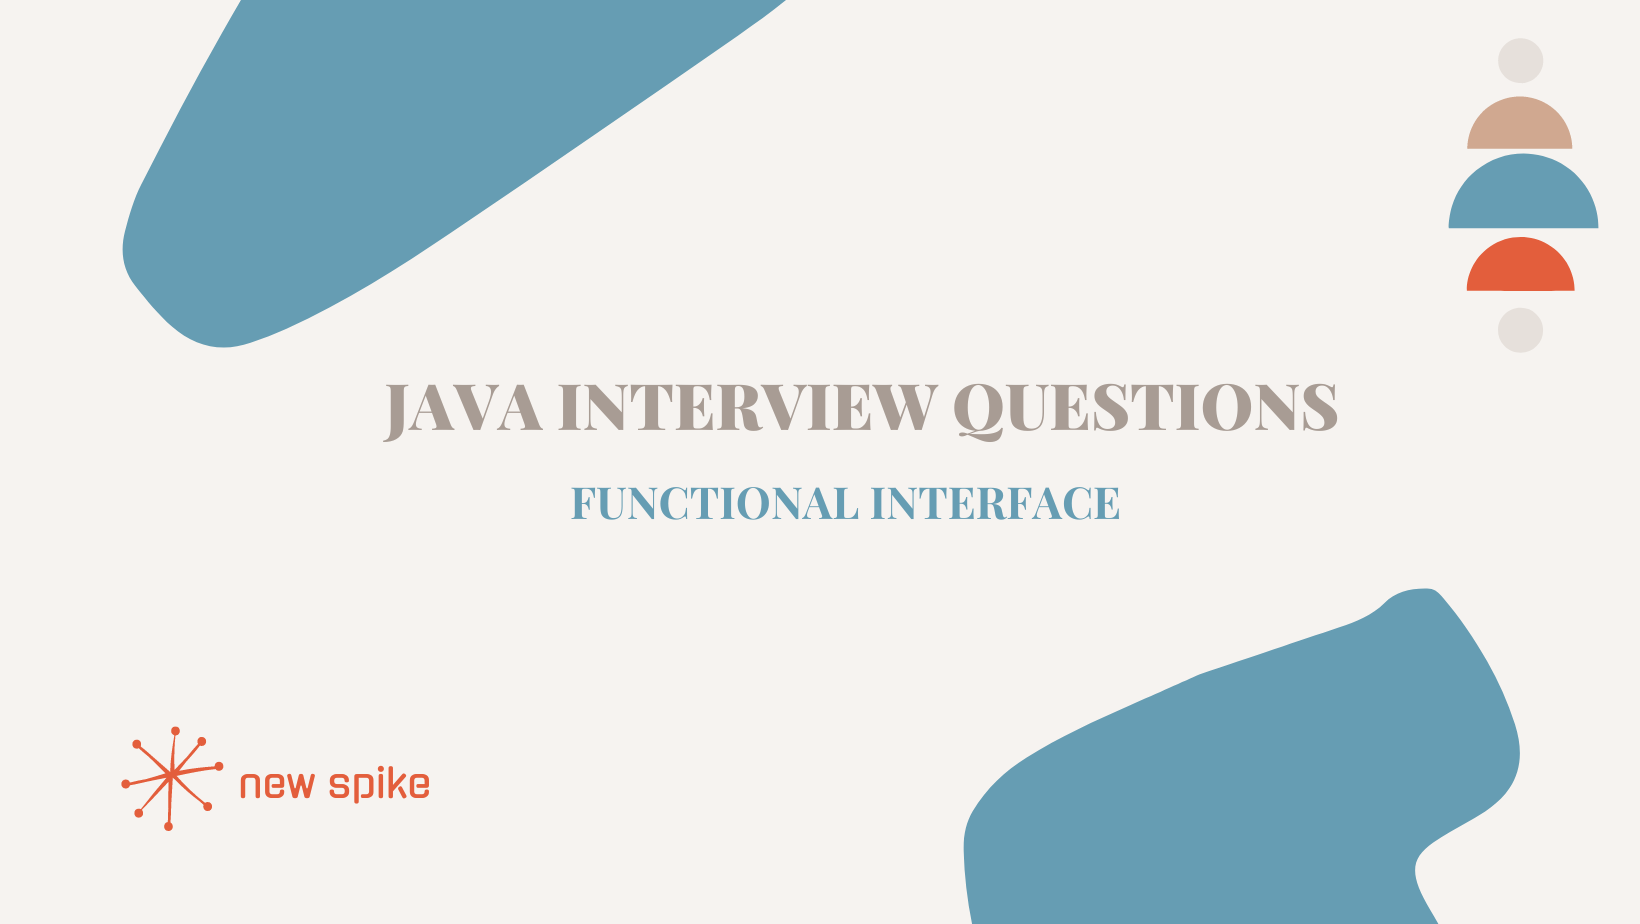 Java Interview Questions (Series) - Functional Interface